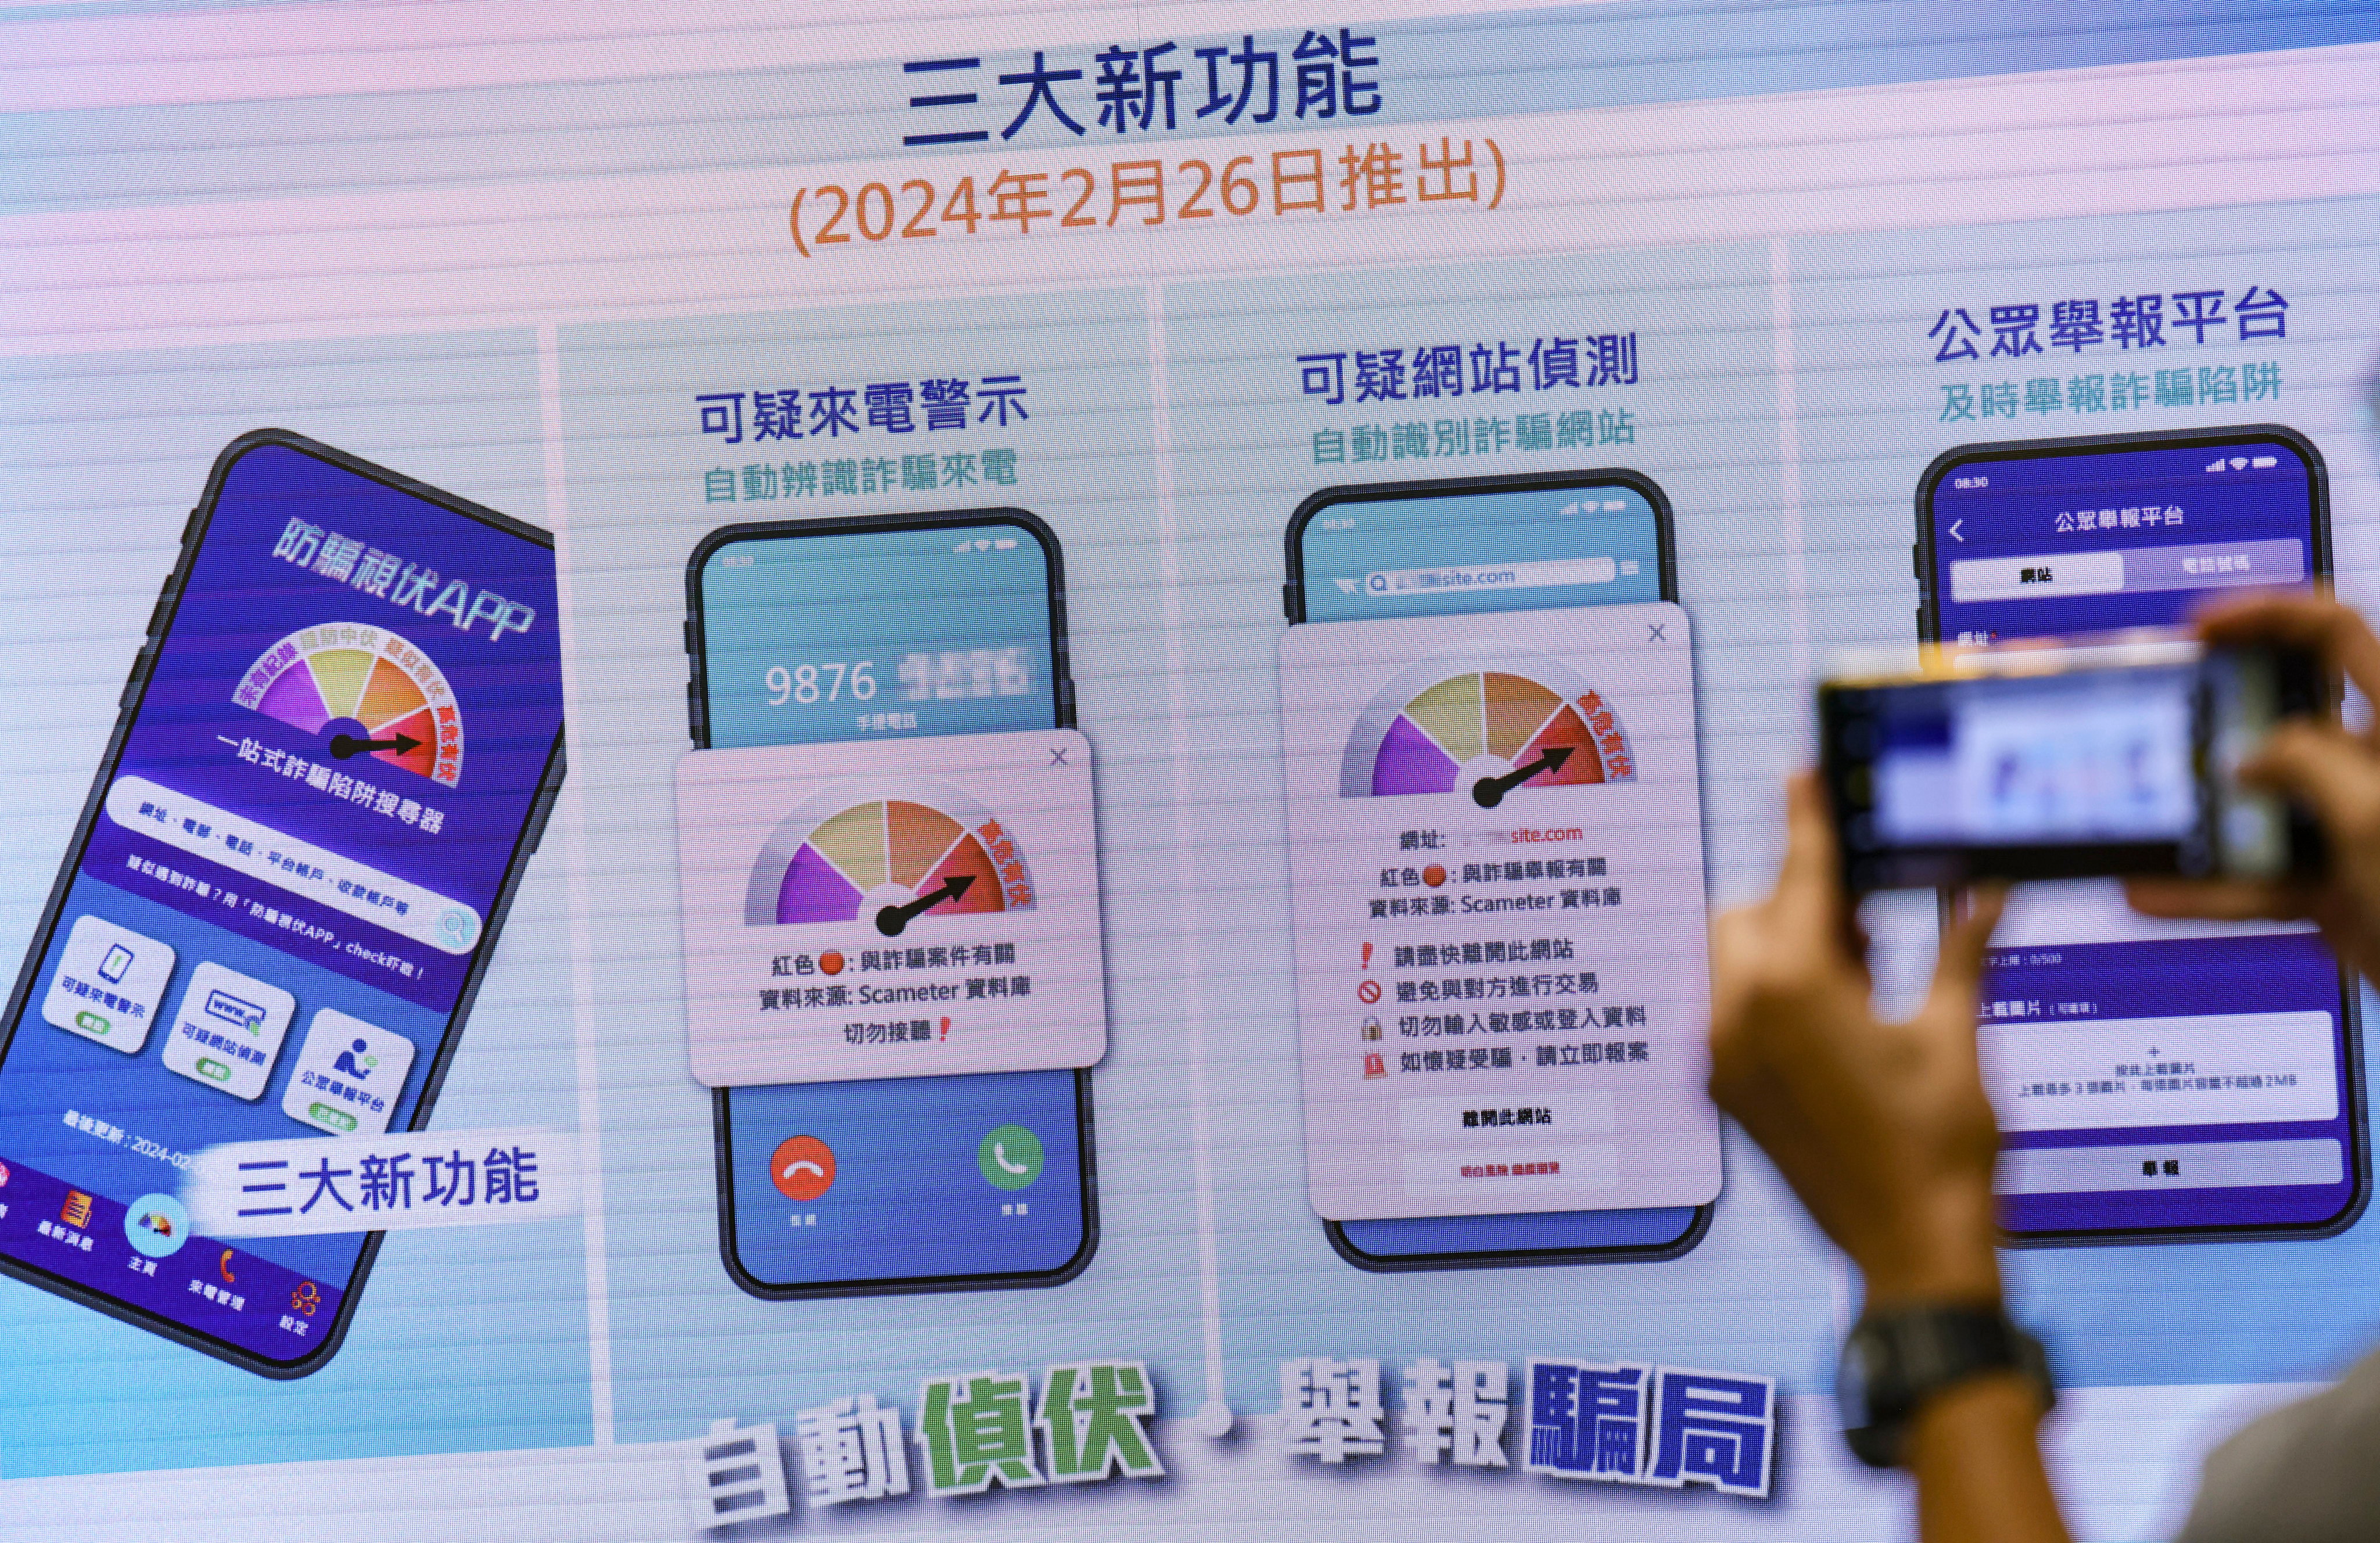 Hong Kong’s police chief has called on residents to download anti-fraud app, Scameter, which provides an up-to-date database on suspicious websites and phone numbers. Photo: Jelly Tse